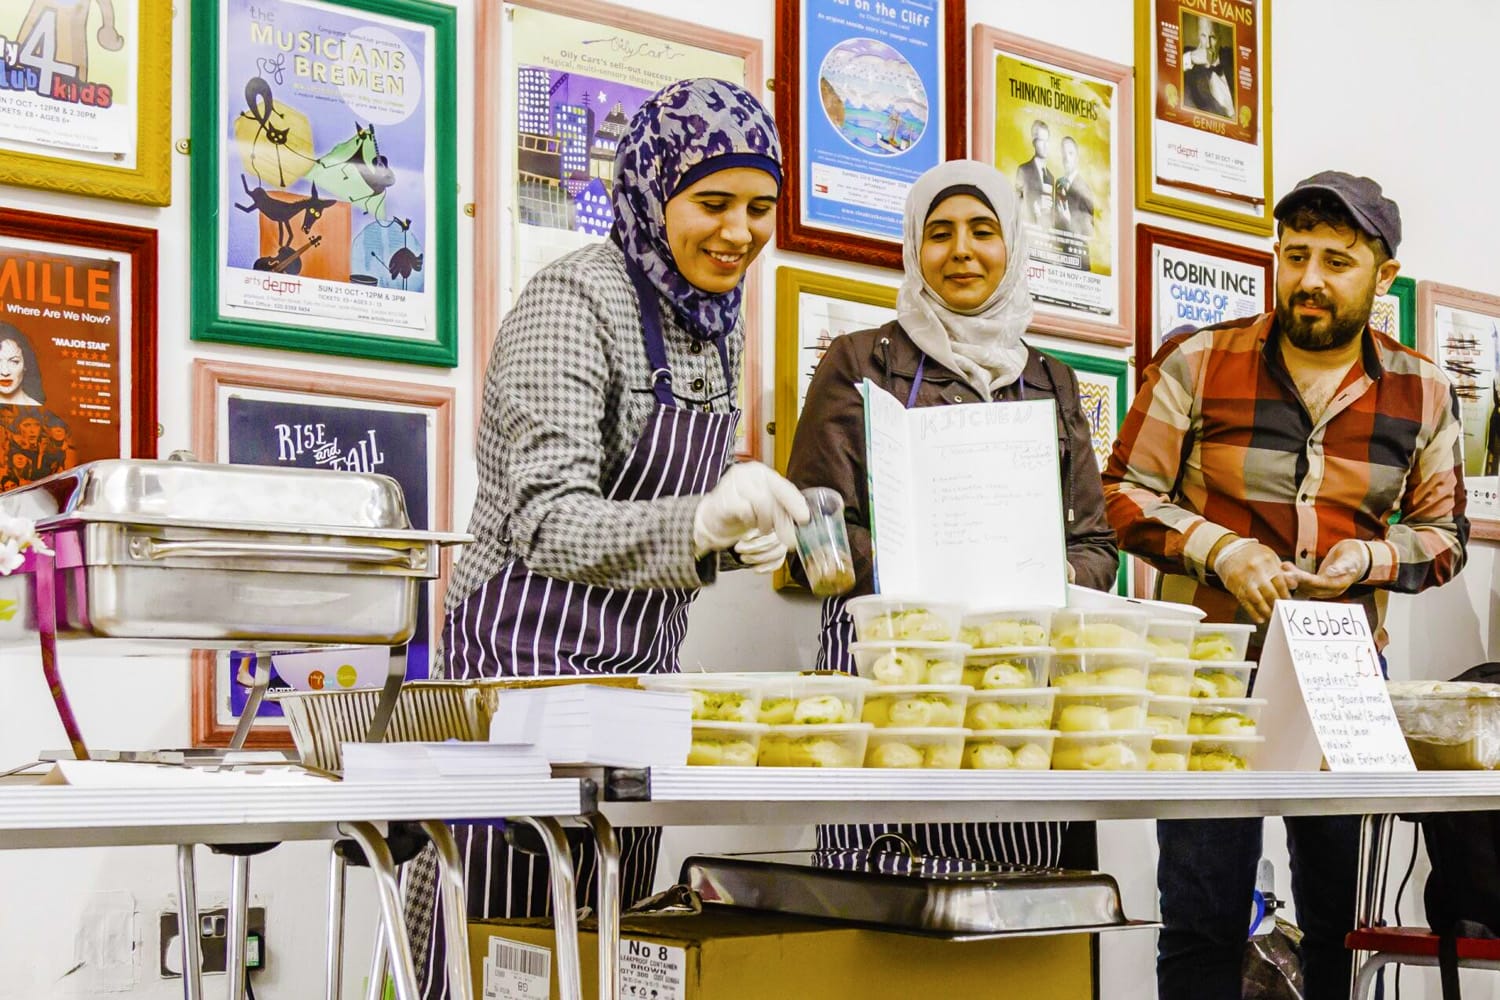 Community vendors host a Syrian food tasting stall at an artsdepot event. The vendors smile together and attend to the food.